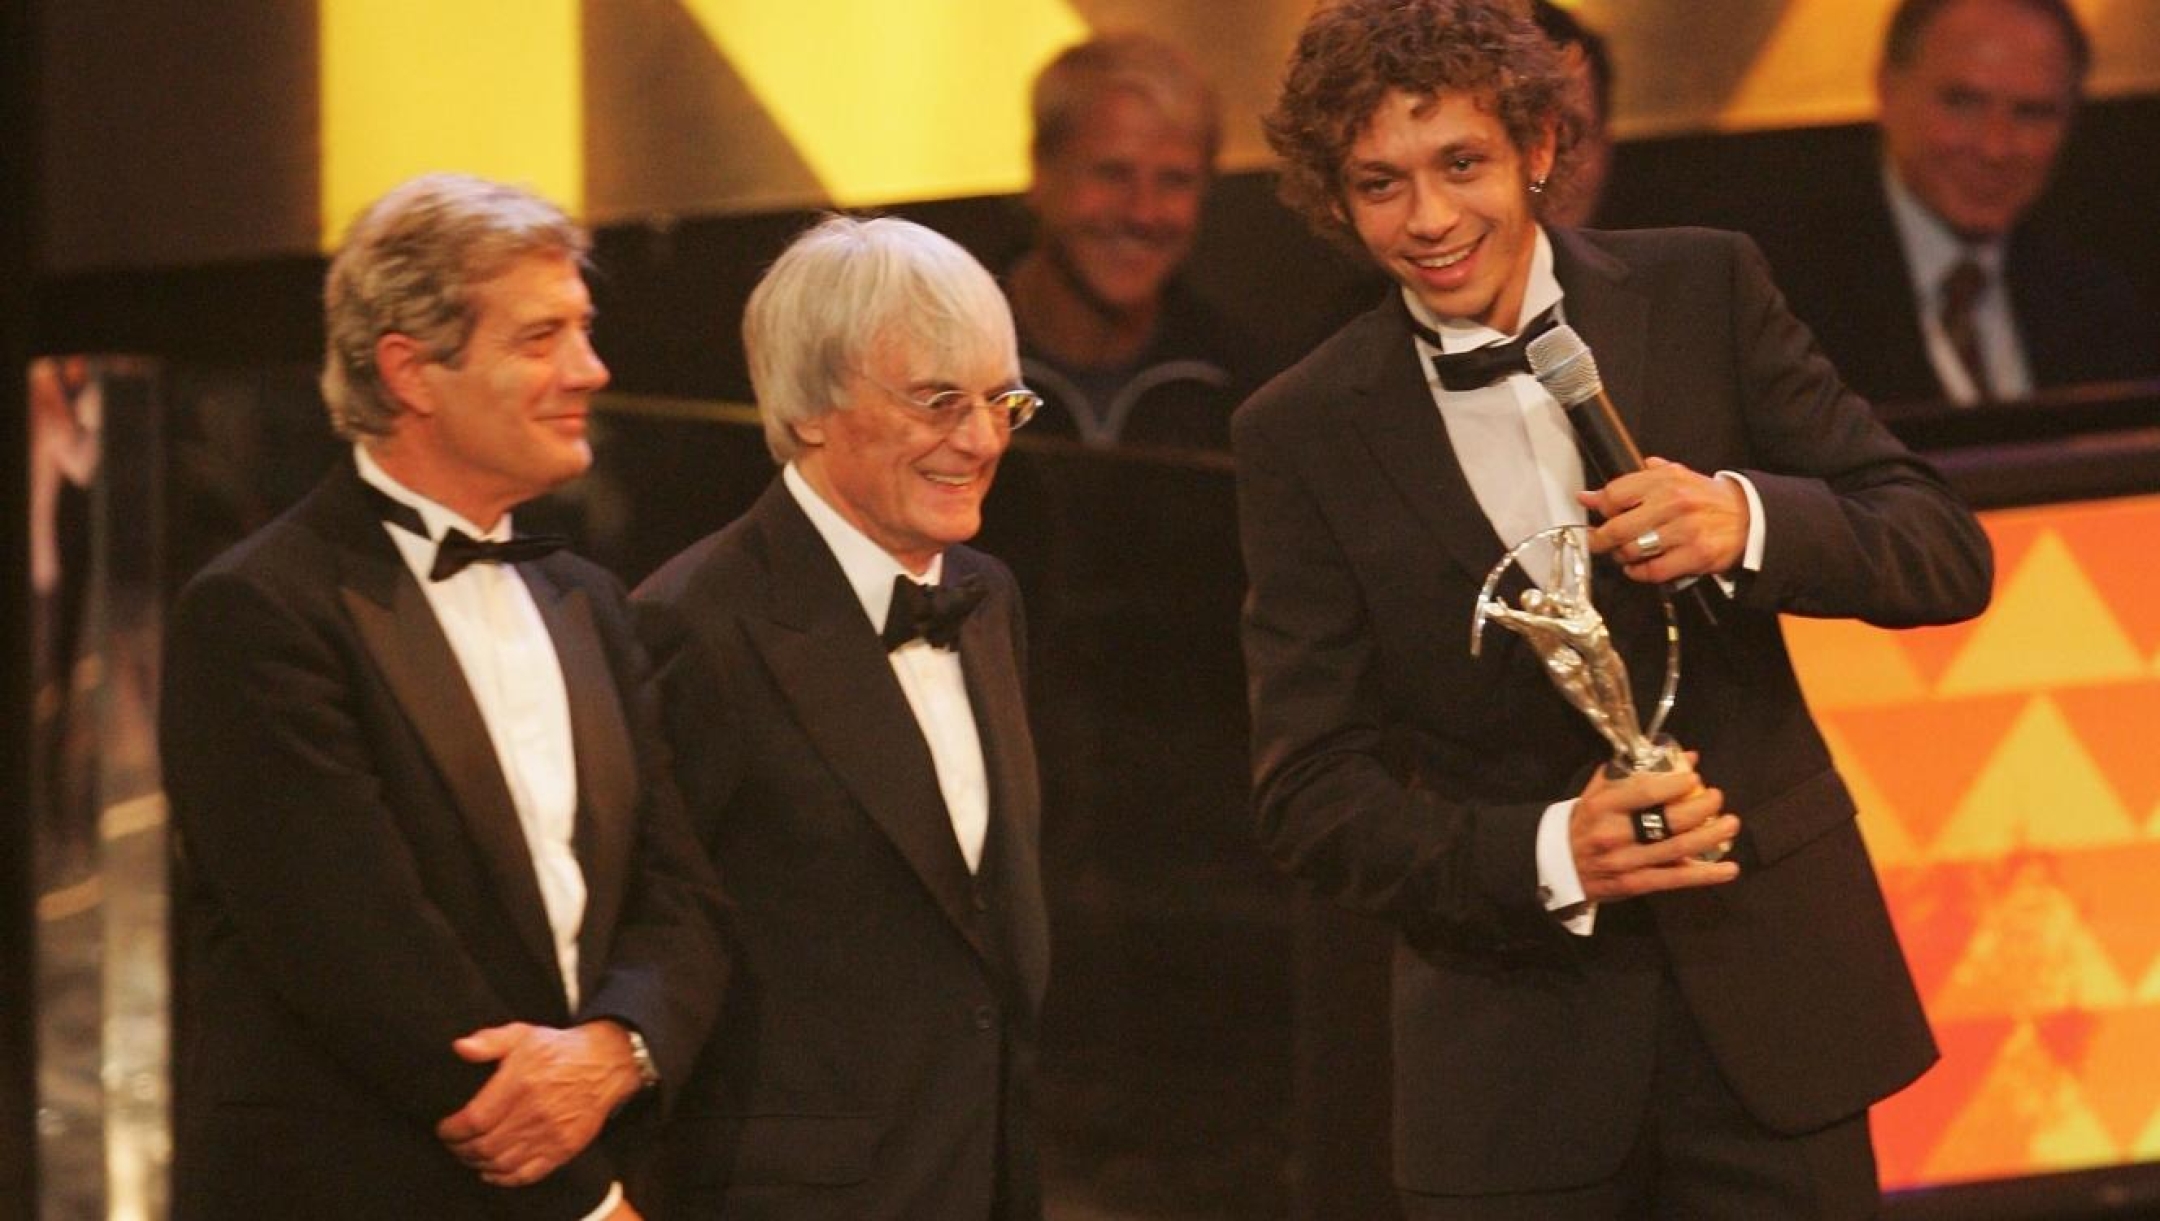 BARCELONA, SPAIN - MAY 22:  Academy member Giacomo Agostini (left), Bernie Ecclestone (centre) and Valentino Rossi during the Laureus World Sports Awards held at the Parc del Forum on May 22, 2006 in Barcelona, Spain.  (Photo by David Cannon/Getty Images for Laureus)